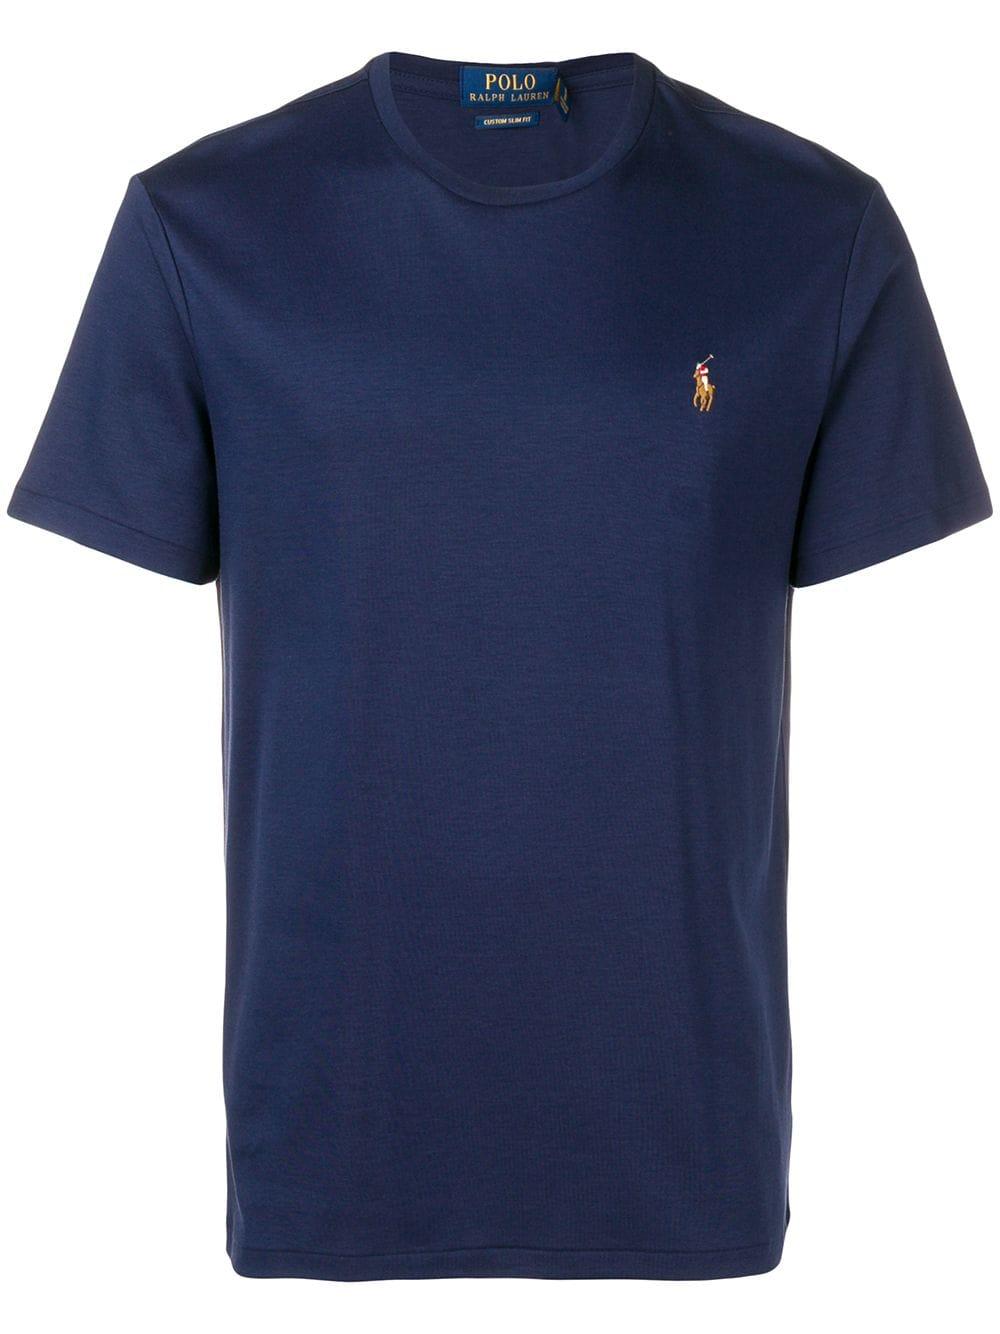 Polo Ralph Lauren Embroidered Logo T-shirt in Blue for Men - Lyst